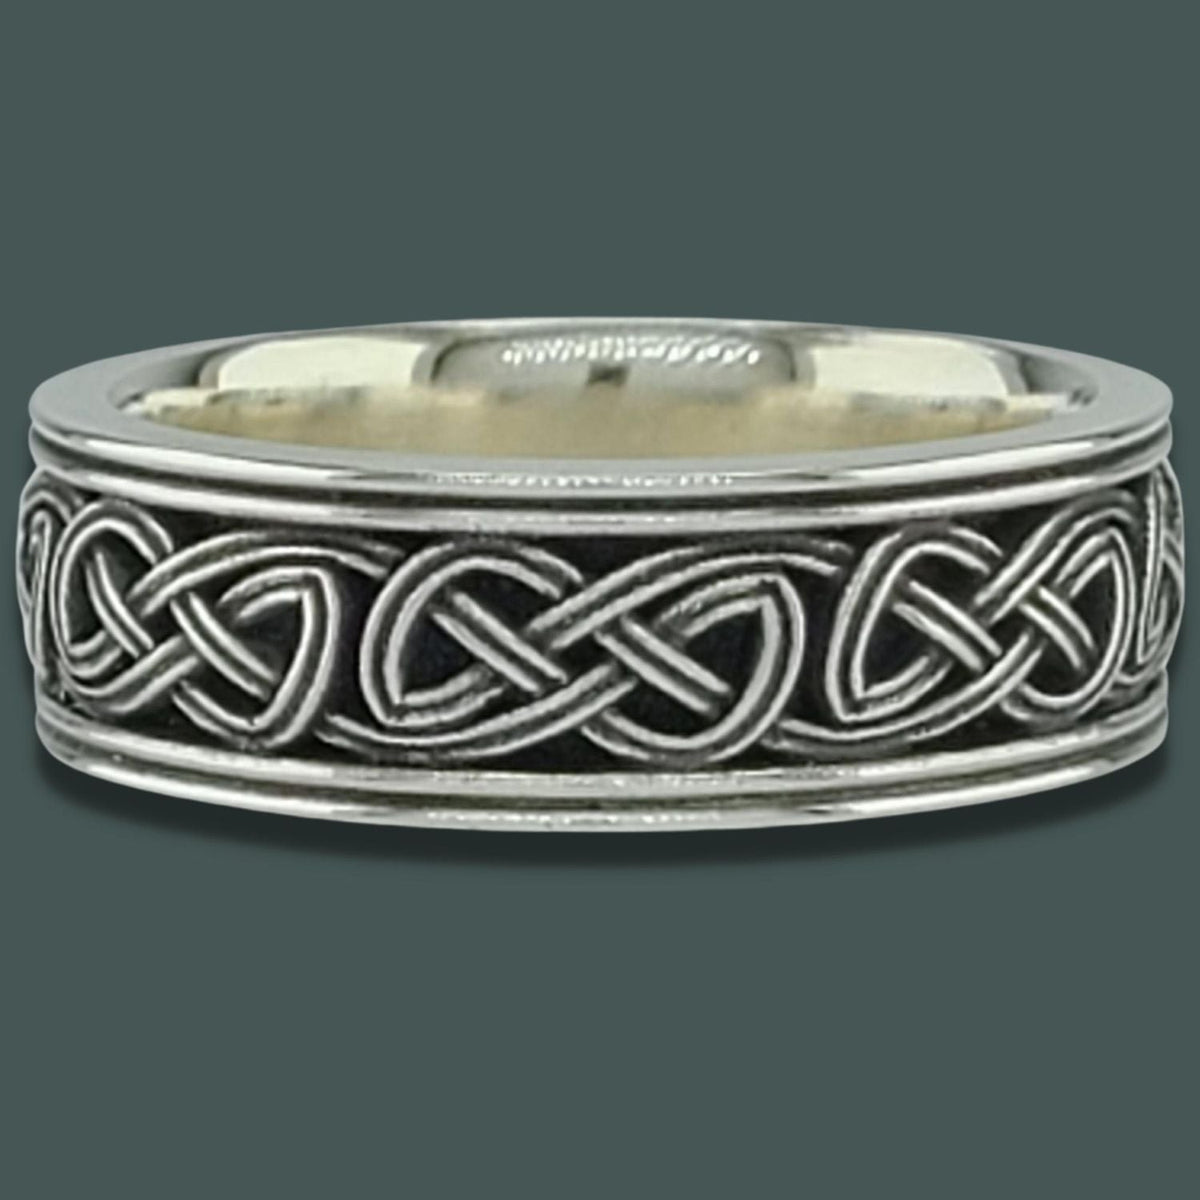 AVIEMORE NARROW - Starting at $139 - Celtic Jewelscapes